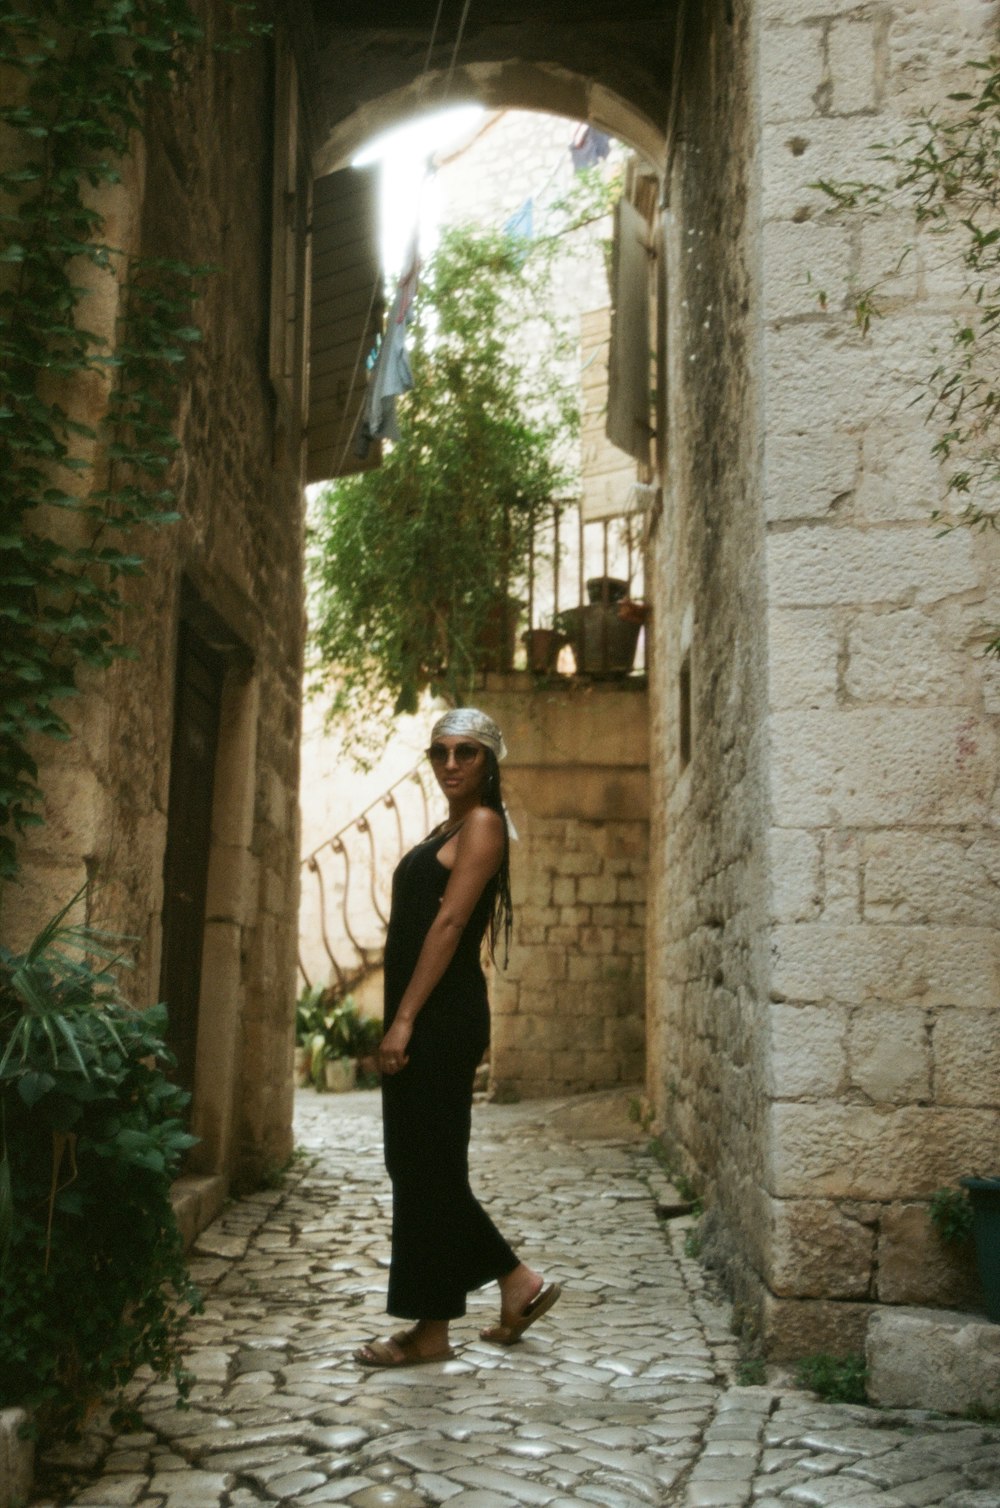 a woman is walking down a narrow alley way